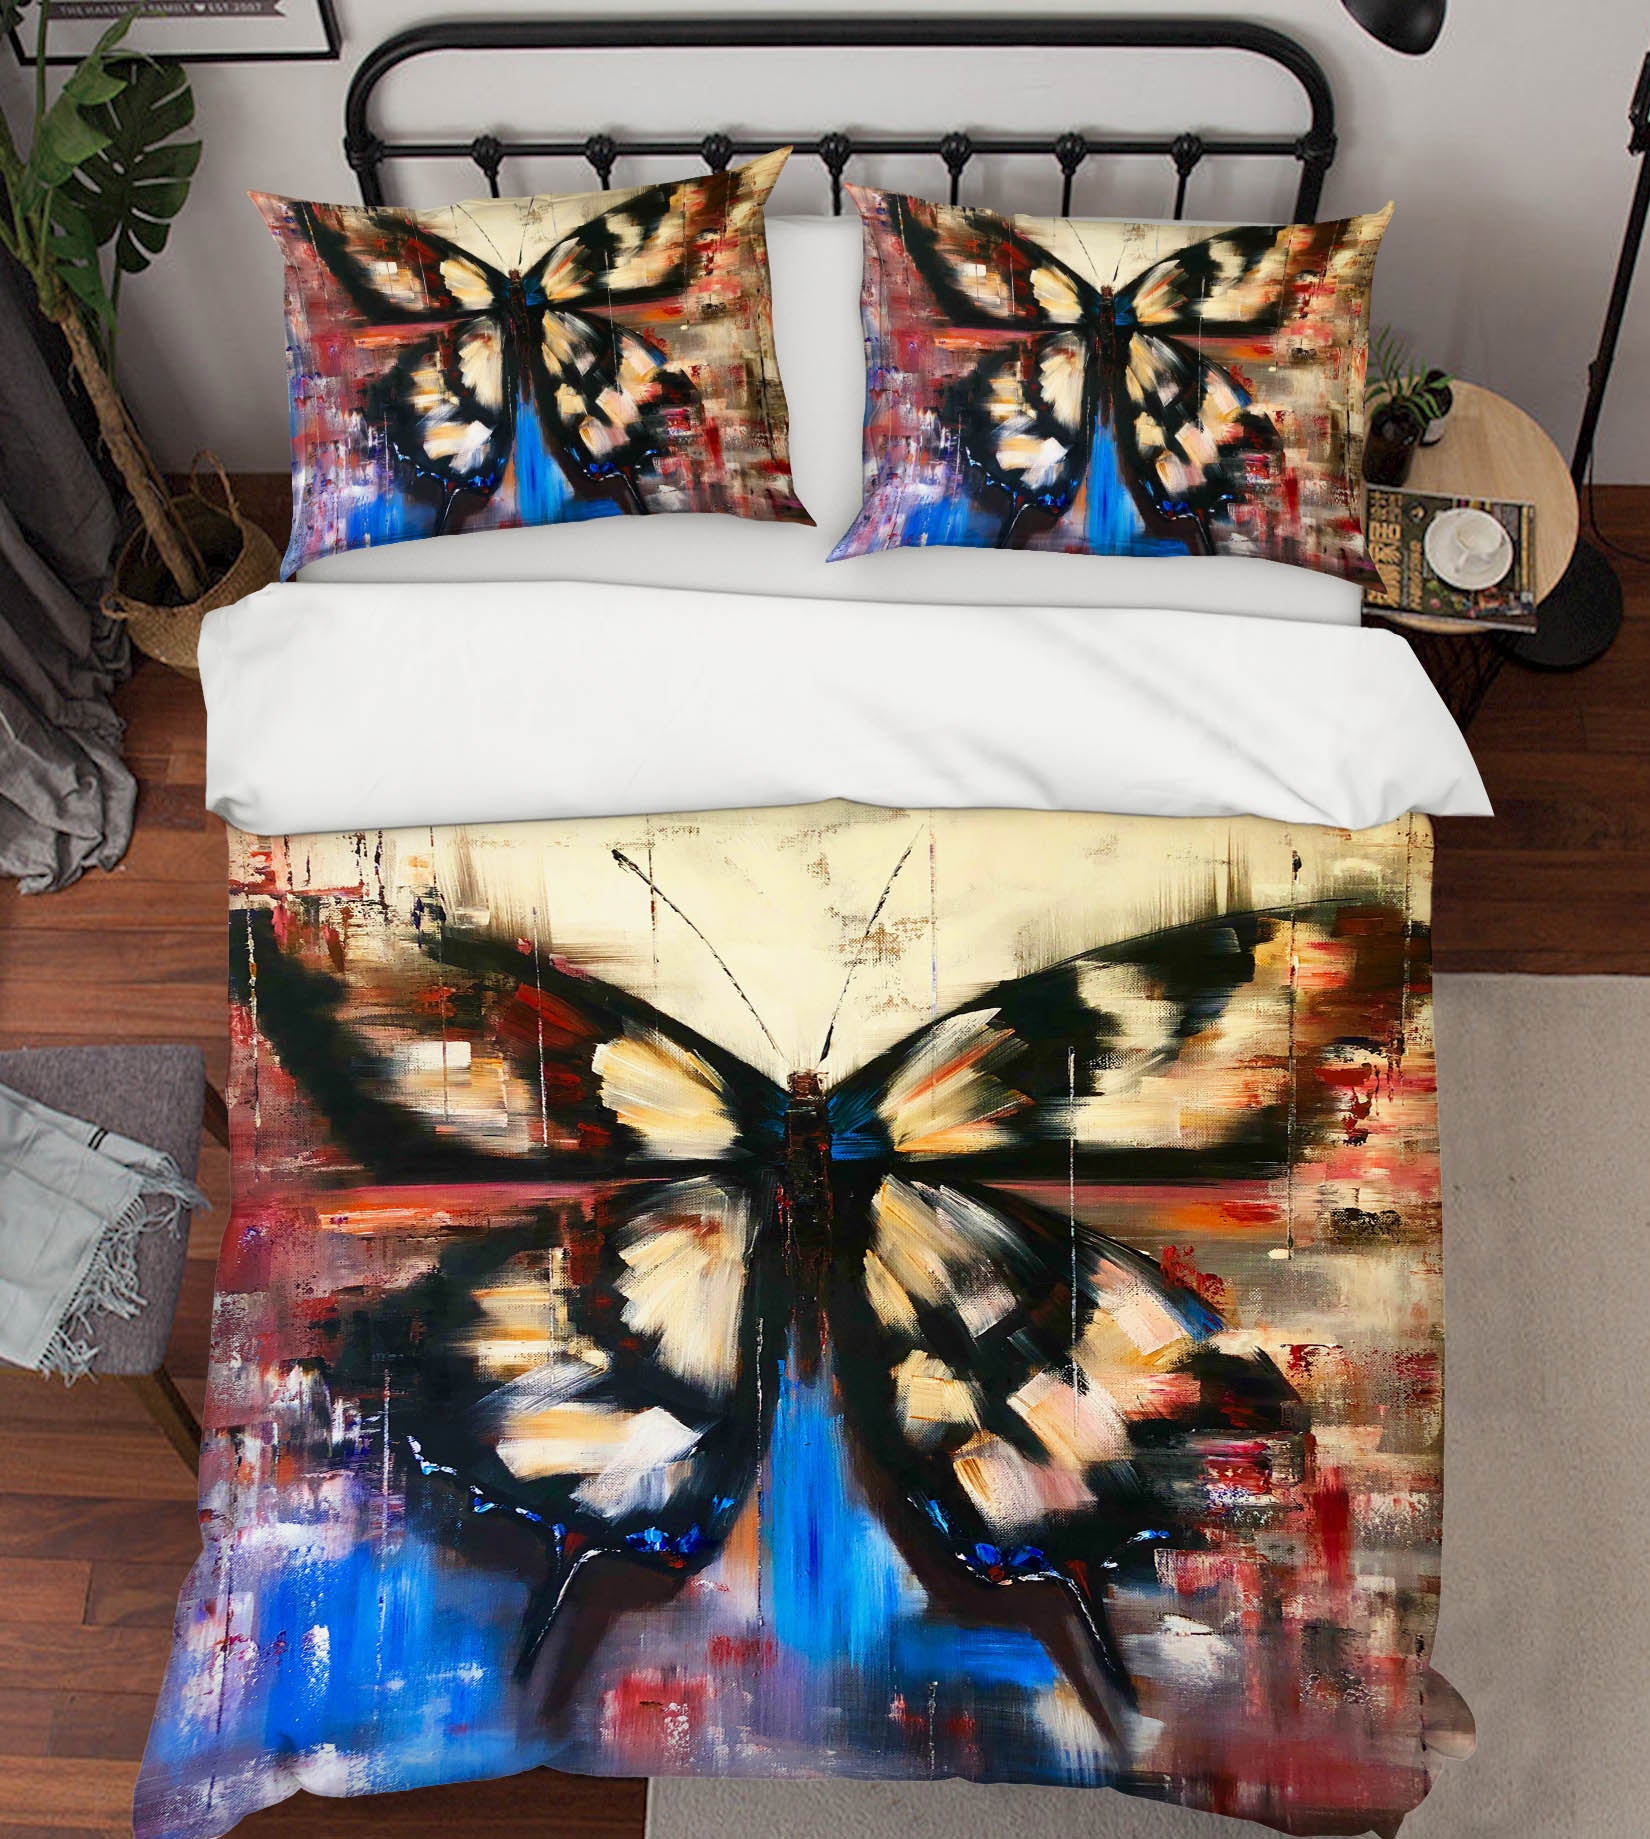 3D Vintage Painted Butterfly 591 Skromova Marina Bedding Bed Pillowcases Quilt